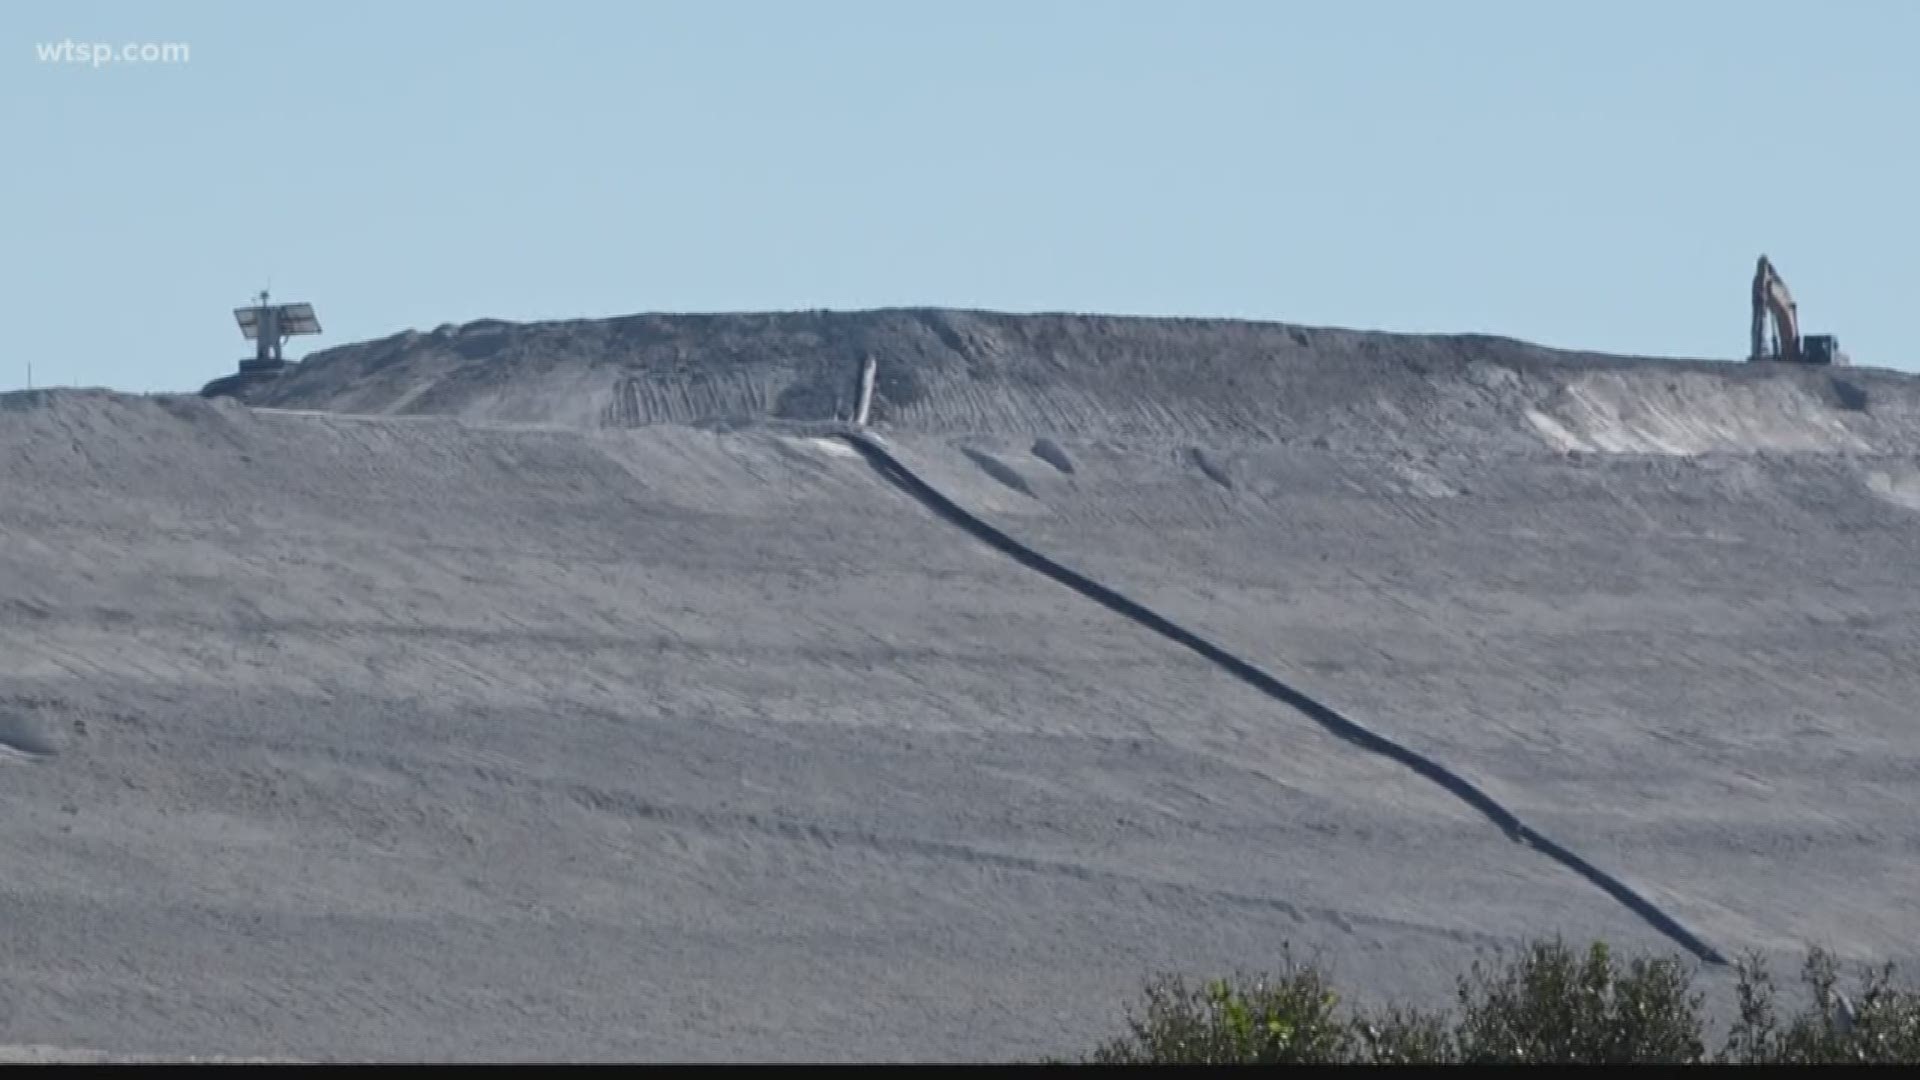 ﻿There has been another leak at another Mosaic facility gypsum stack in Polk County.